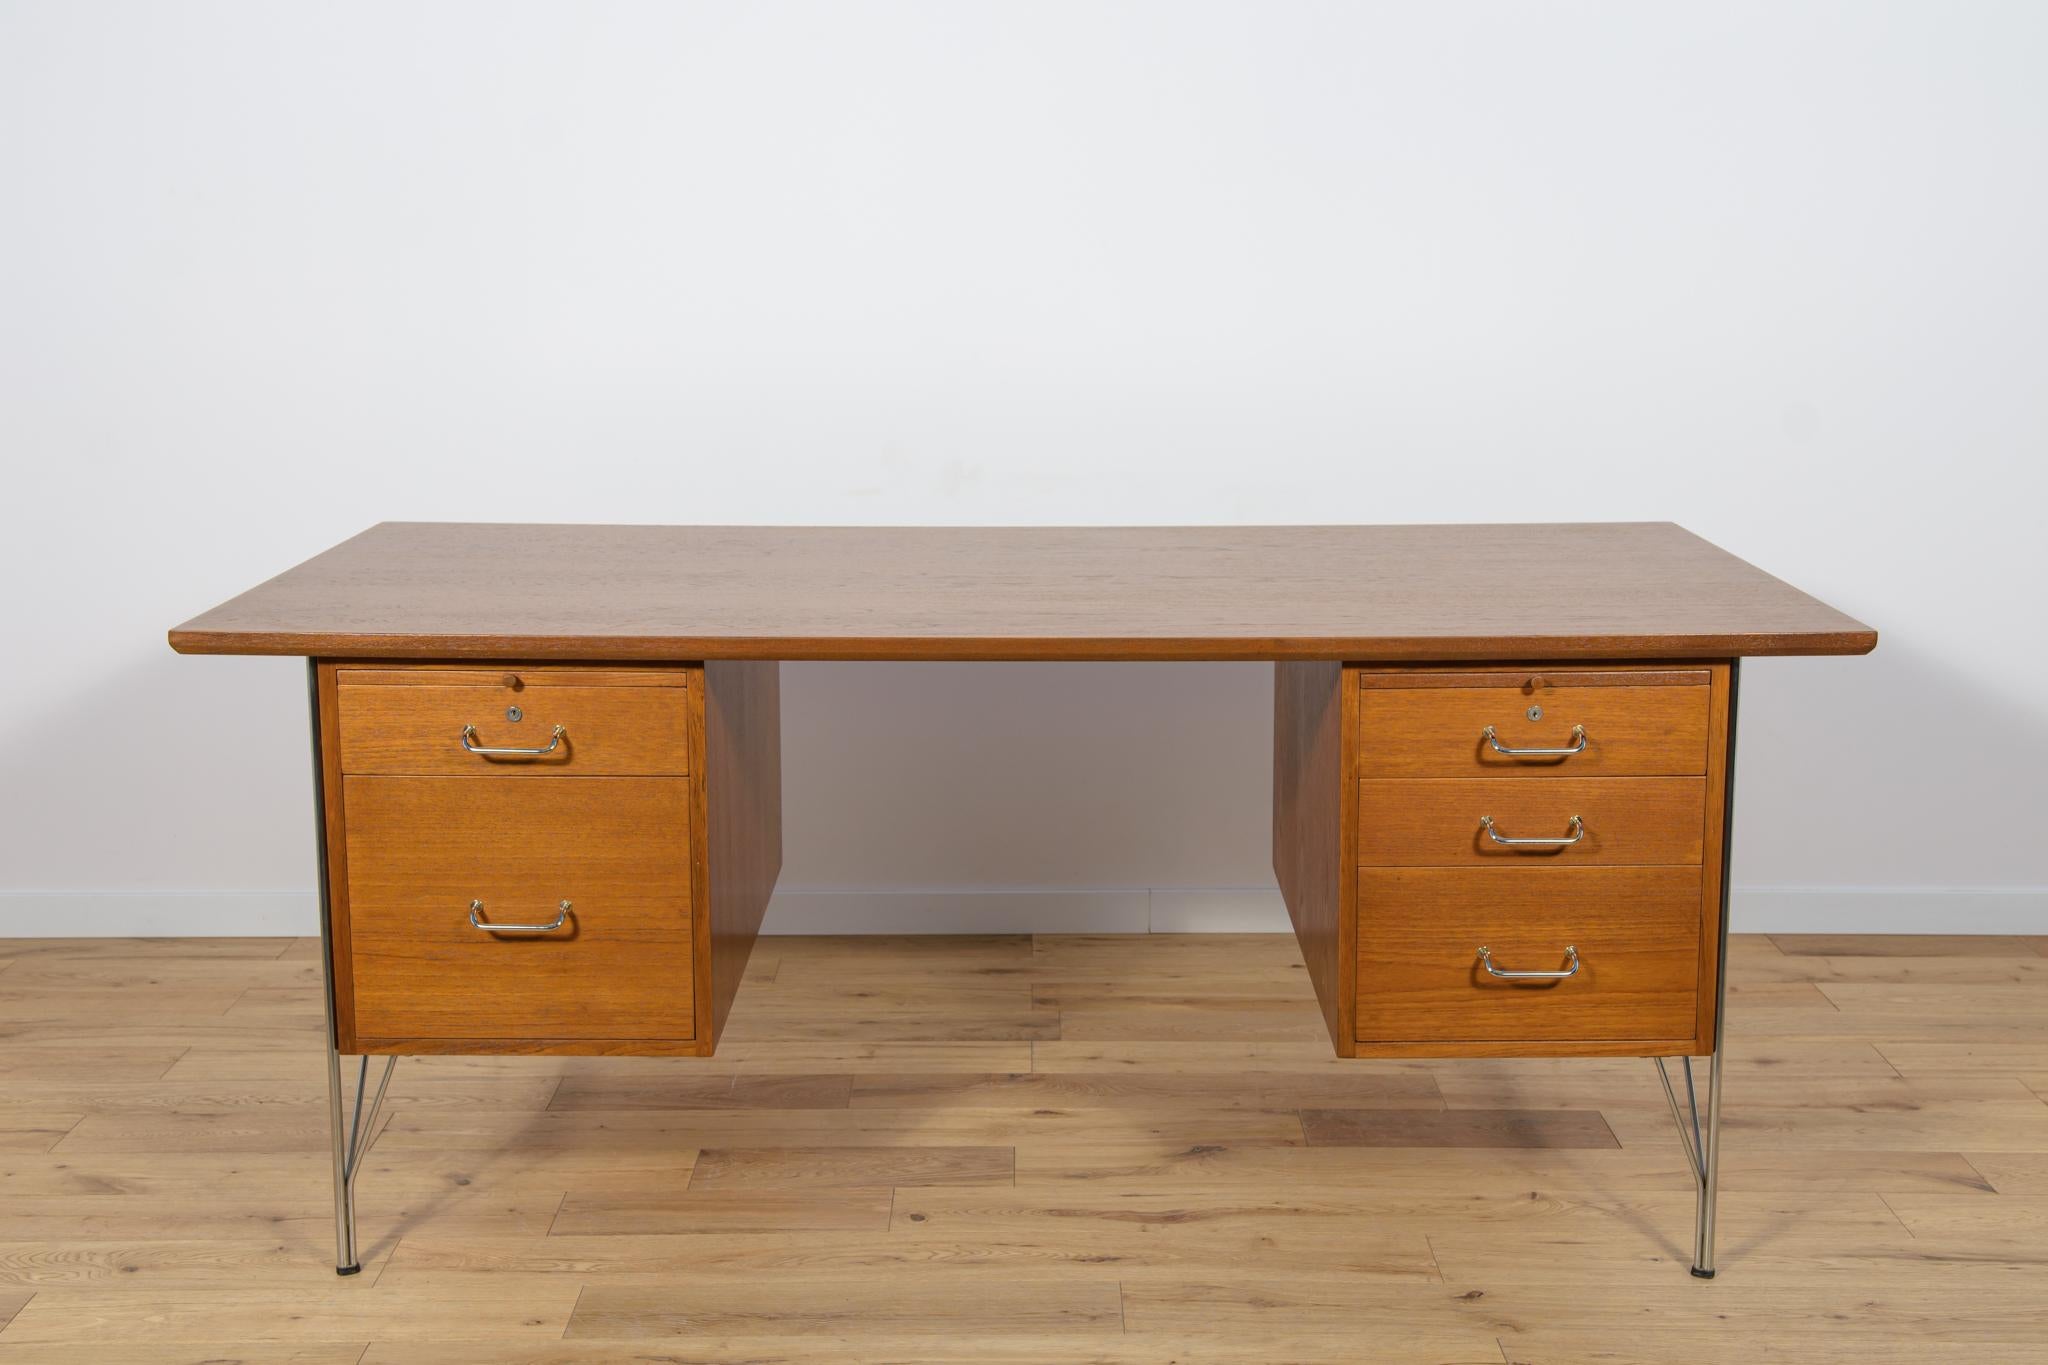 
The desk designed by Heinrich Roepstorff, produced in Denmark in the 1970s. The desk has a large worktop. There are two modules in the desk, on the right there are 3 drawers, on the right there is a drawer and a large drawers on briefcas. Each